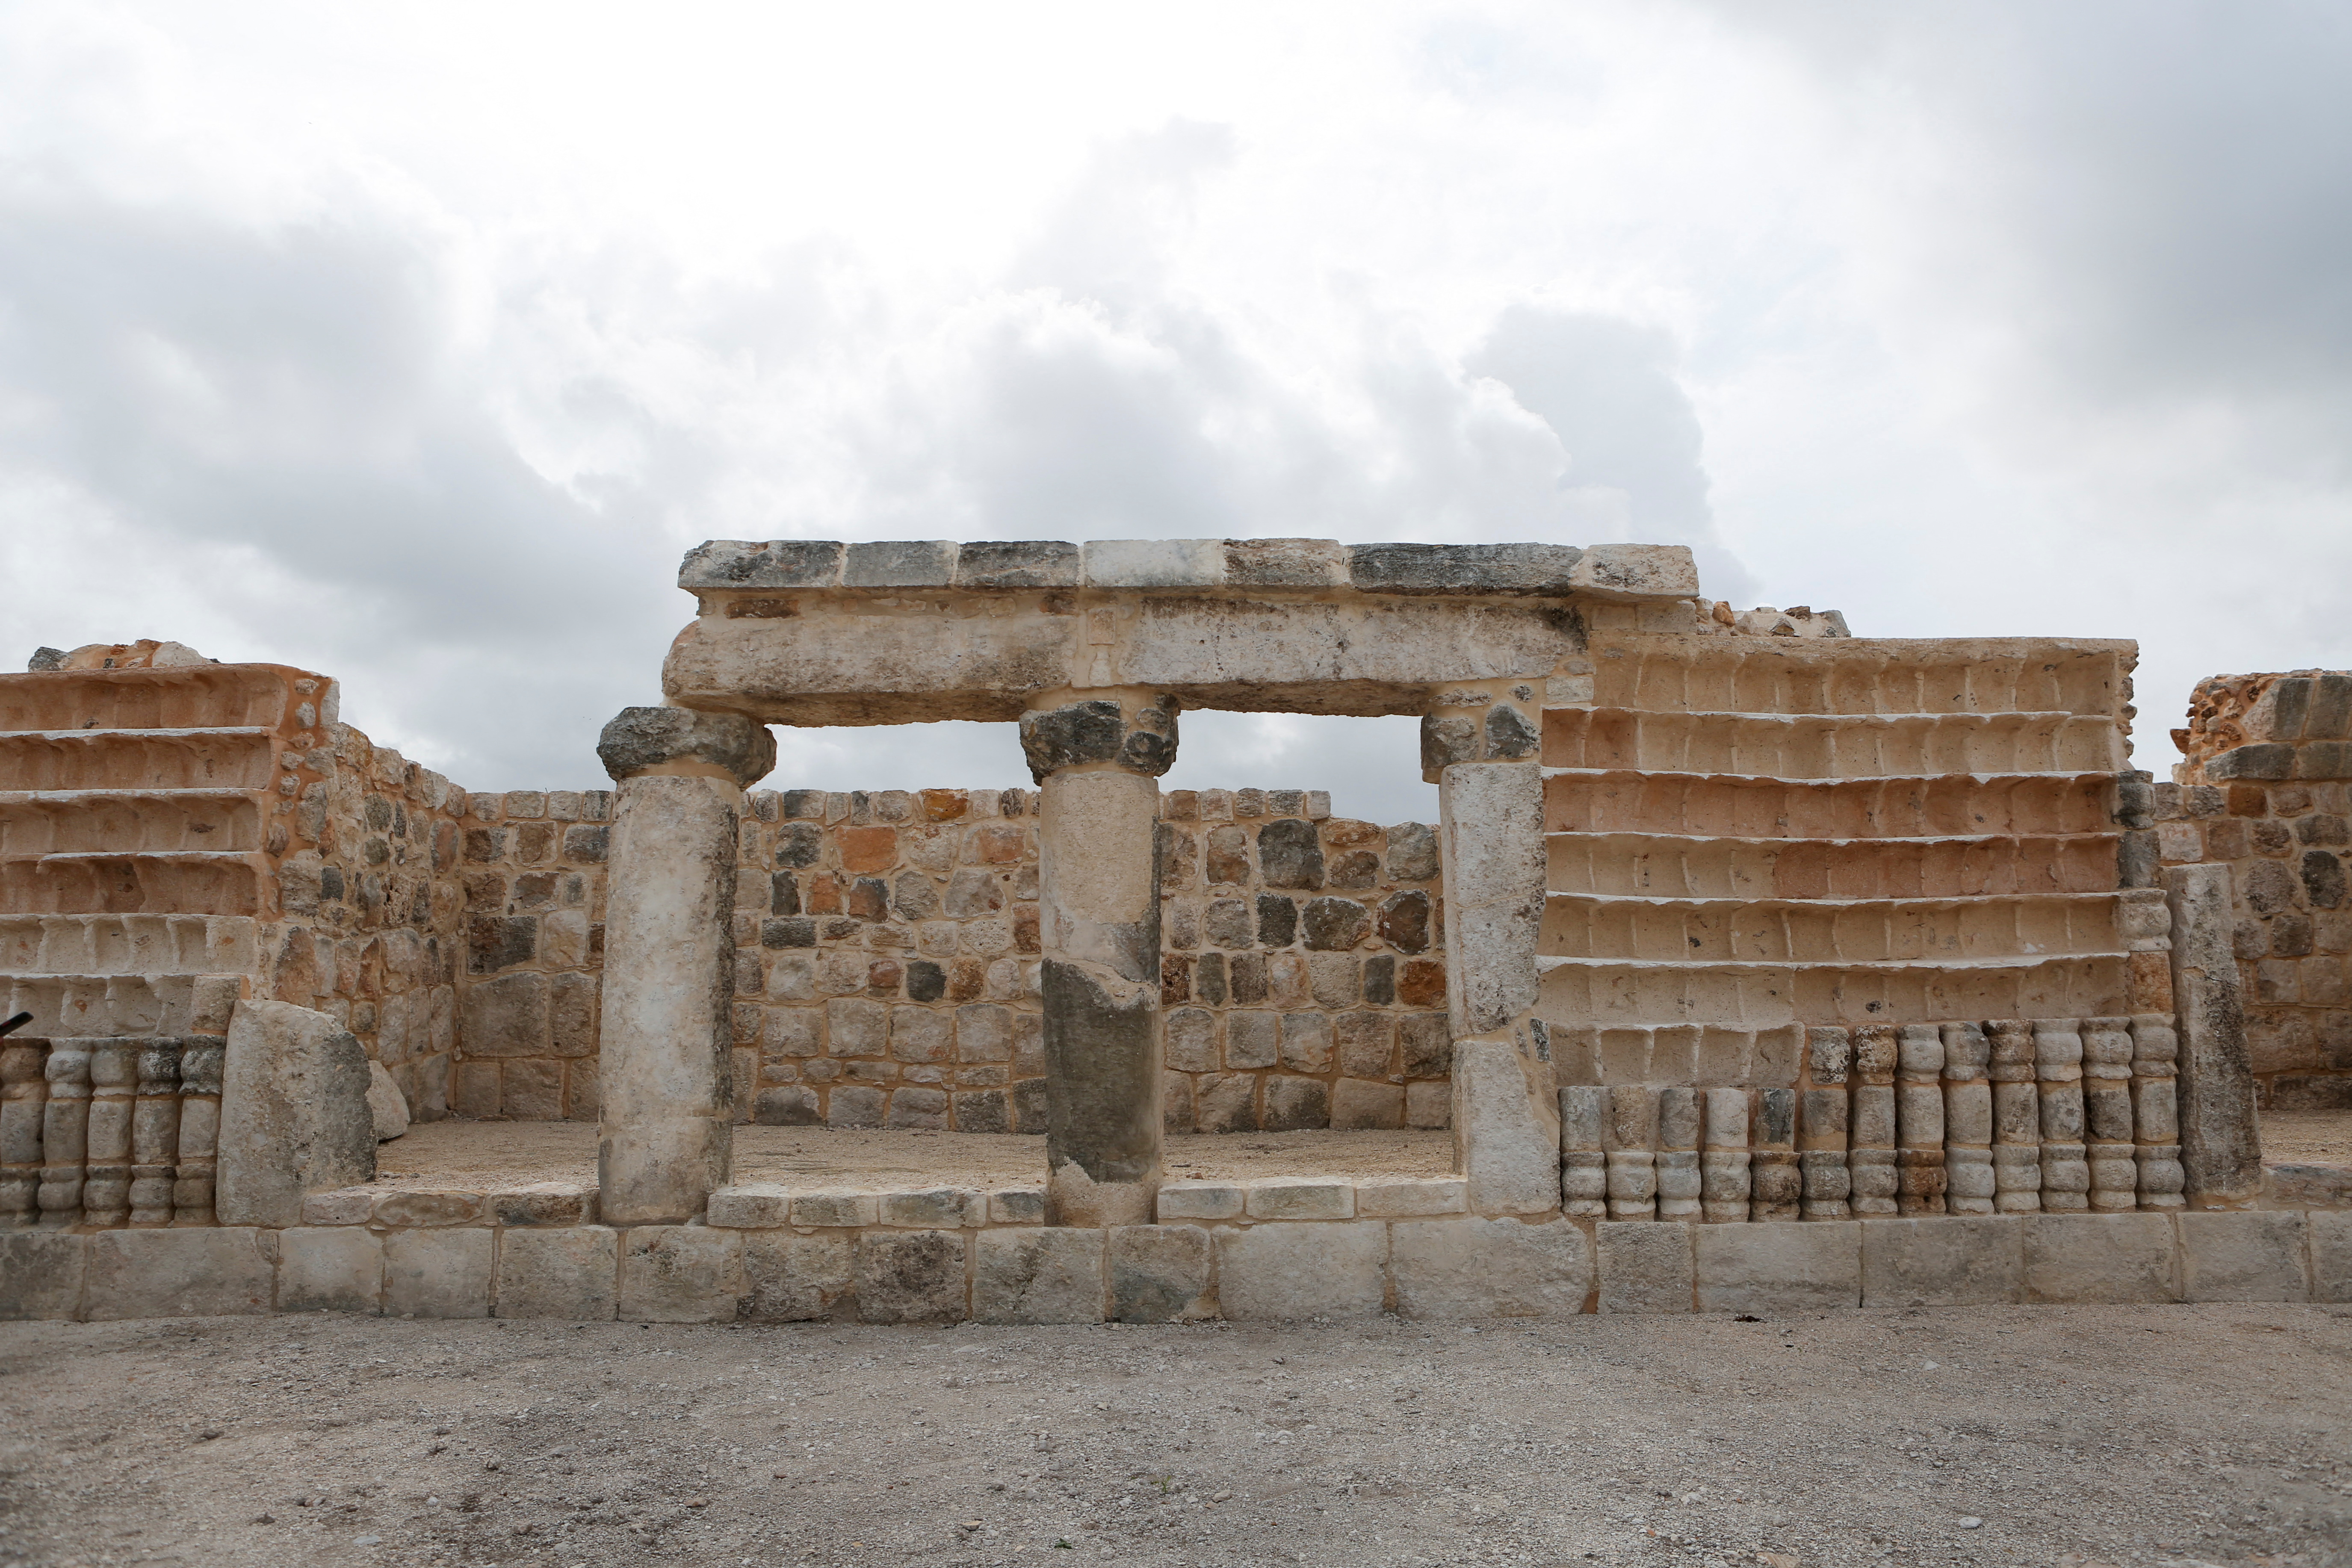 Archaeologists discover ruins of Mayan city in Southern Mexico